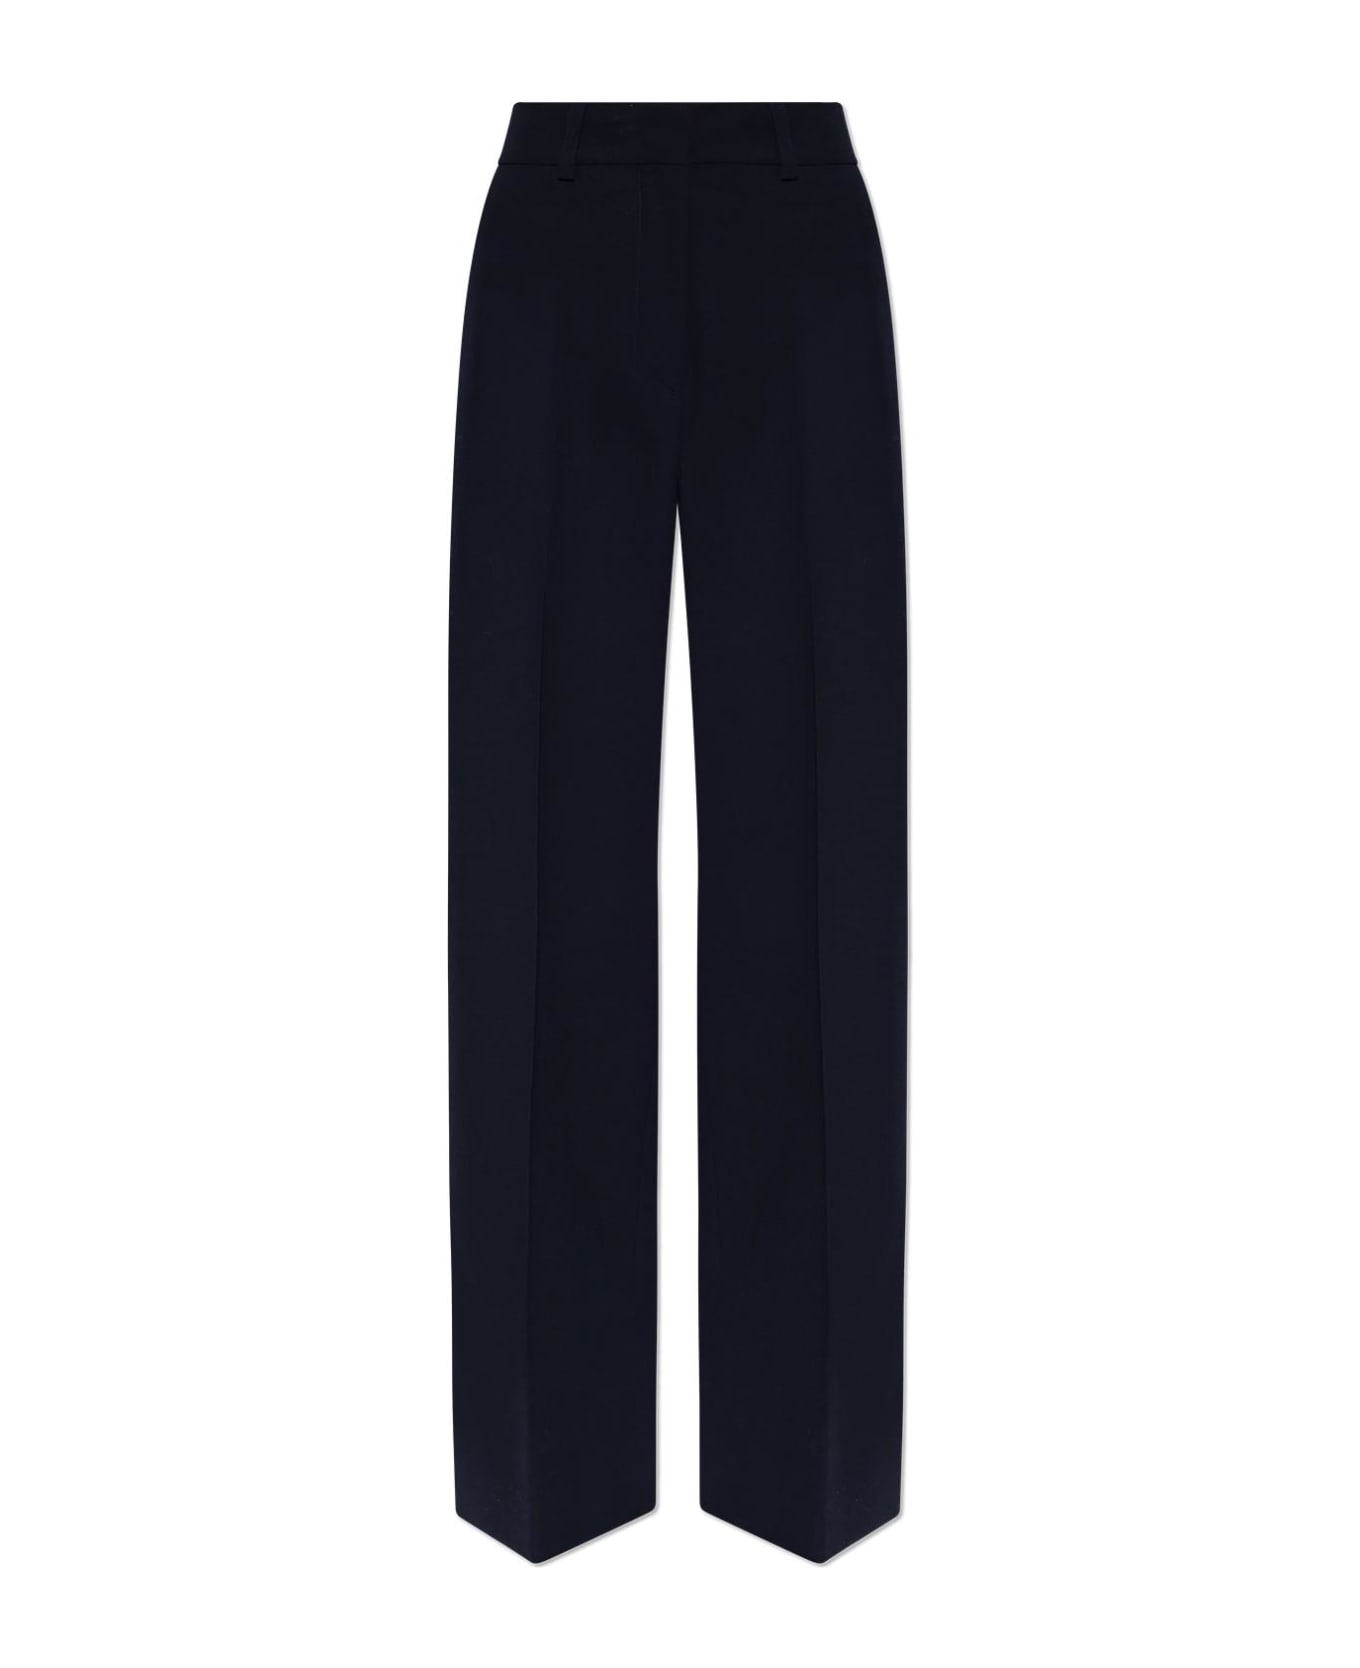 Off-White Wool Pleat-front Trousers ボトムス